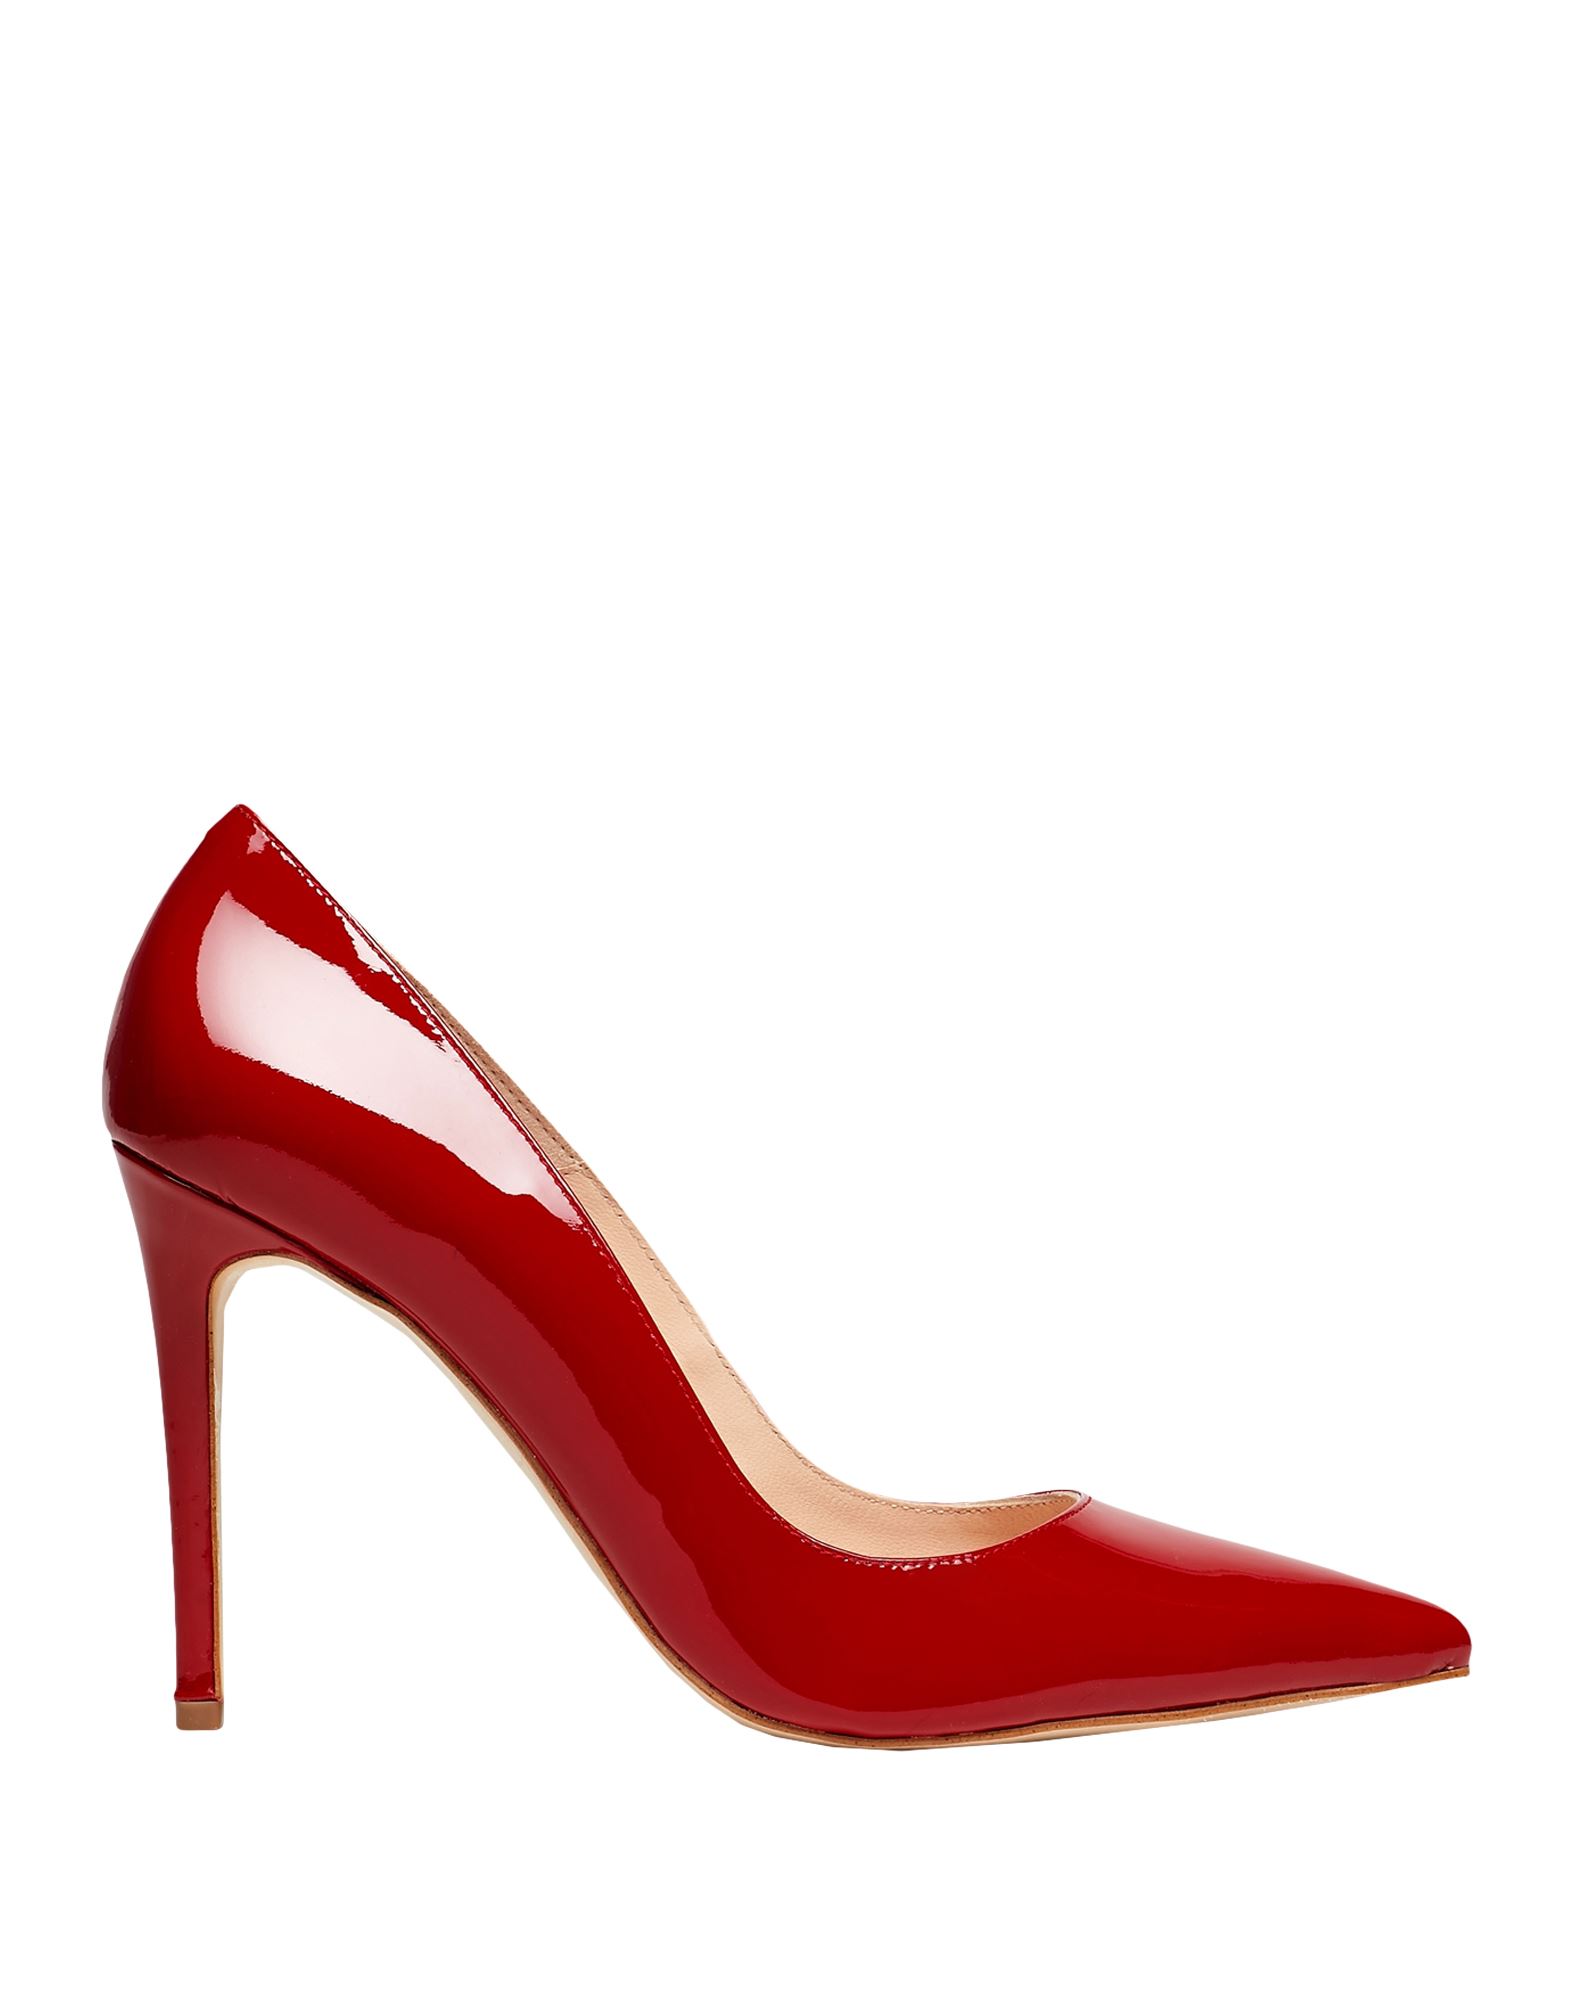 Shop 8 By Yoox Woman Pumps Red Size 8 Calfskin